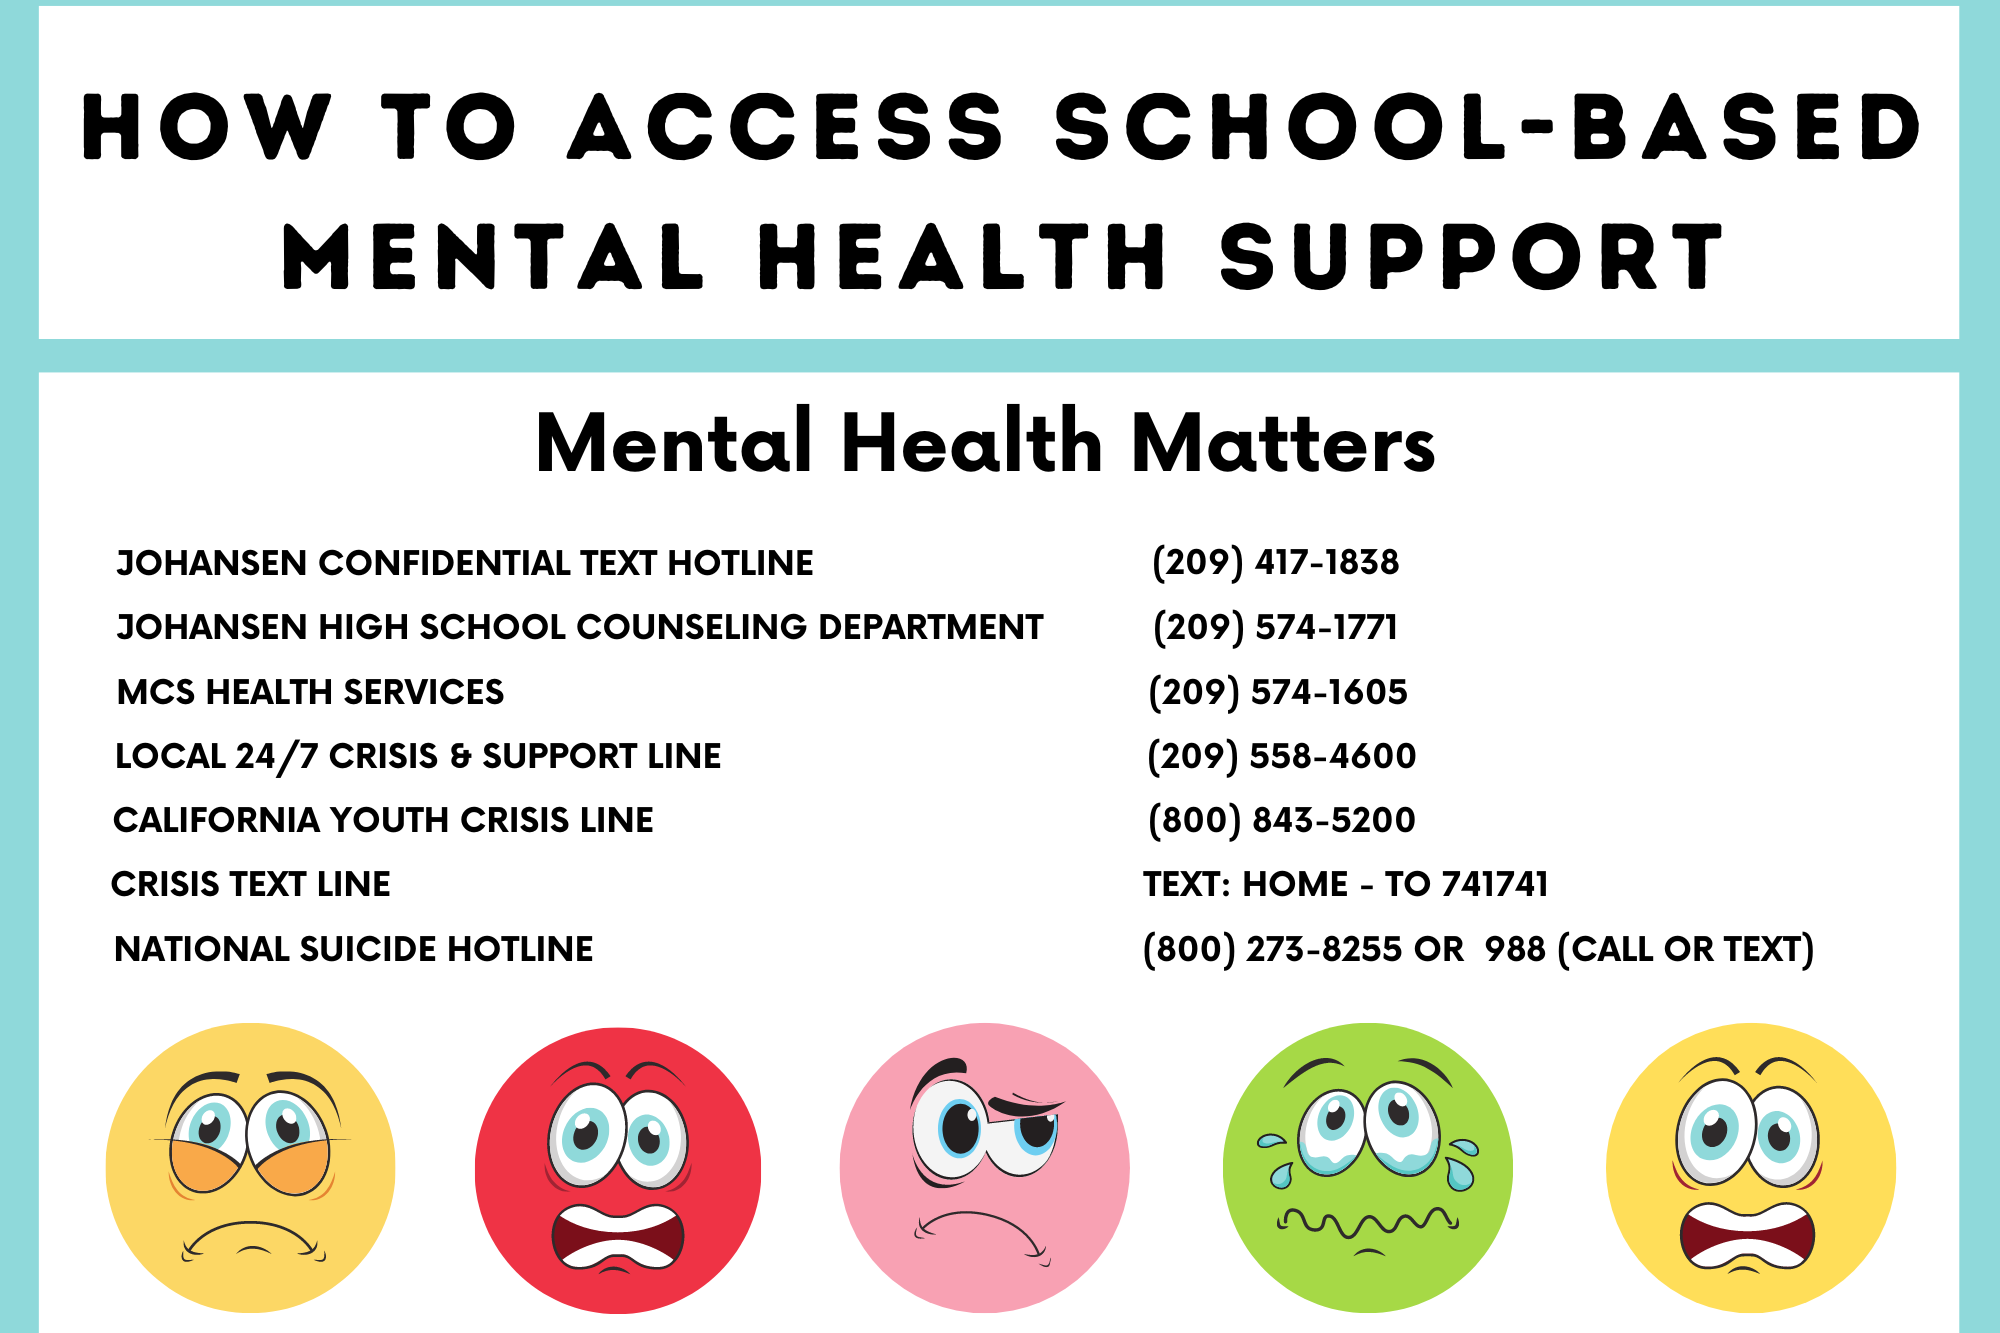 How to access school-based mental health support poster